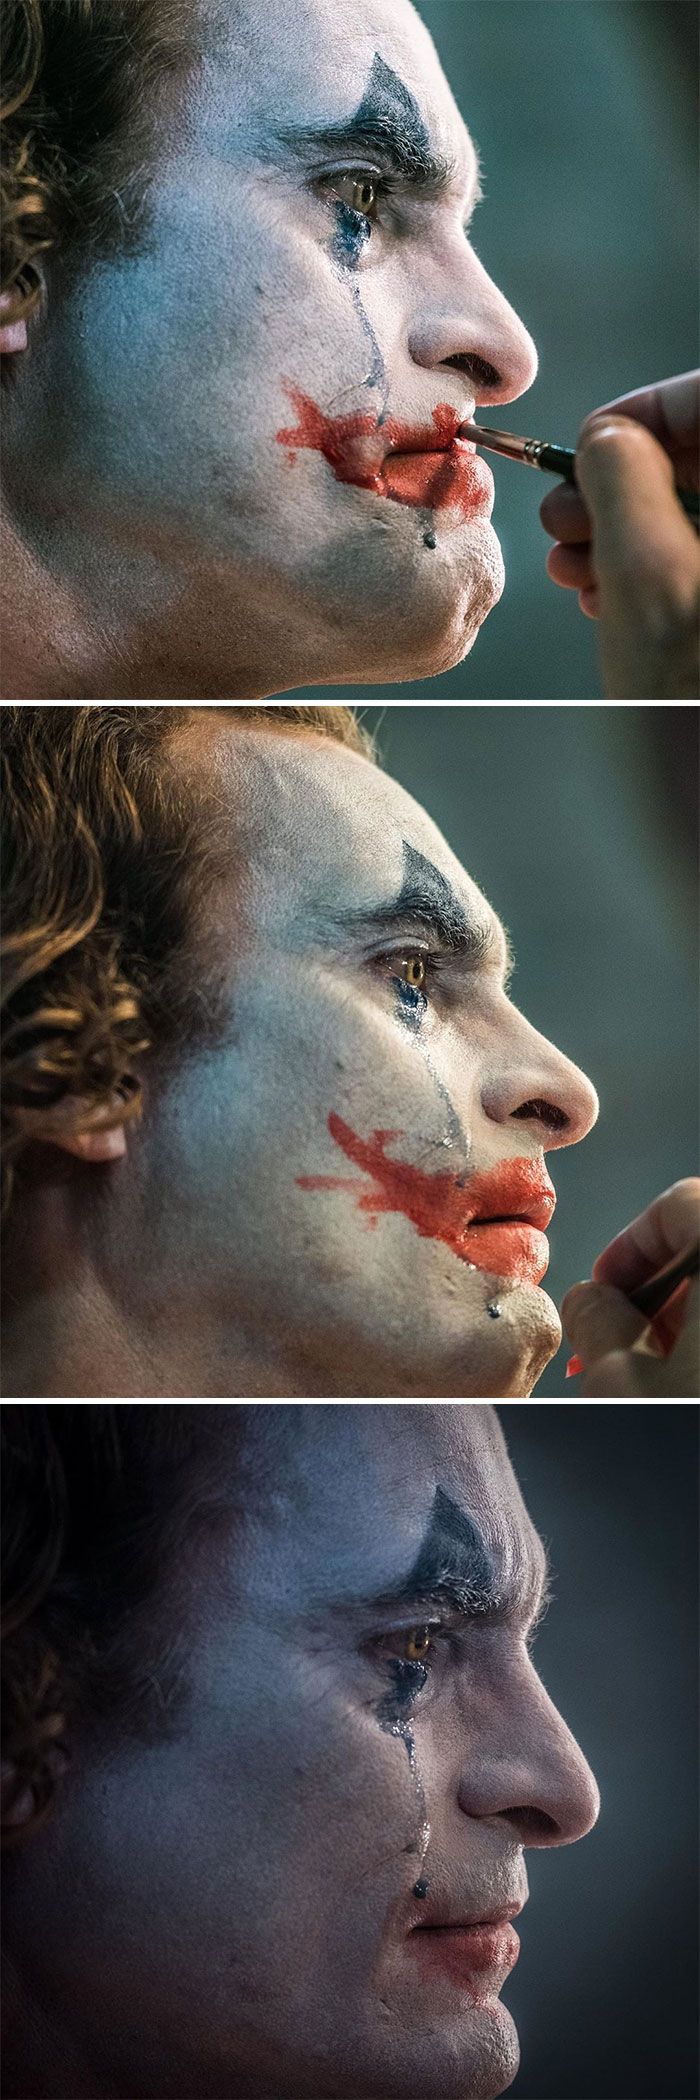 Arthur's Clown Makeup Was Purposefully Made To Look "Antique" — His Lips Were Made A Reddish-Brown To Resemble Blood